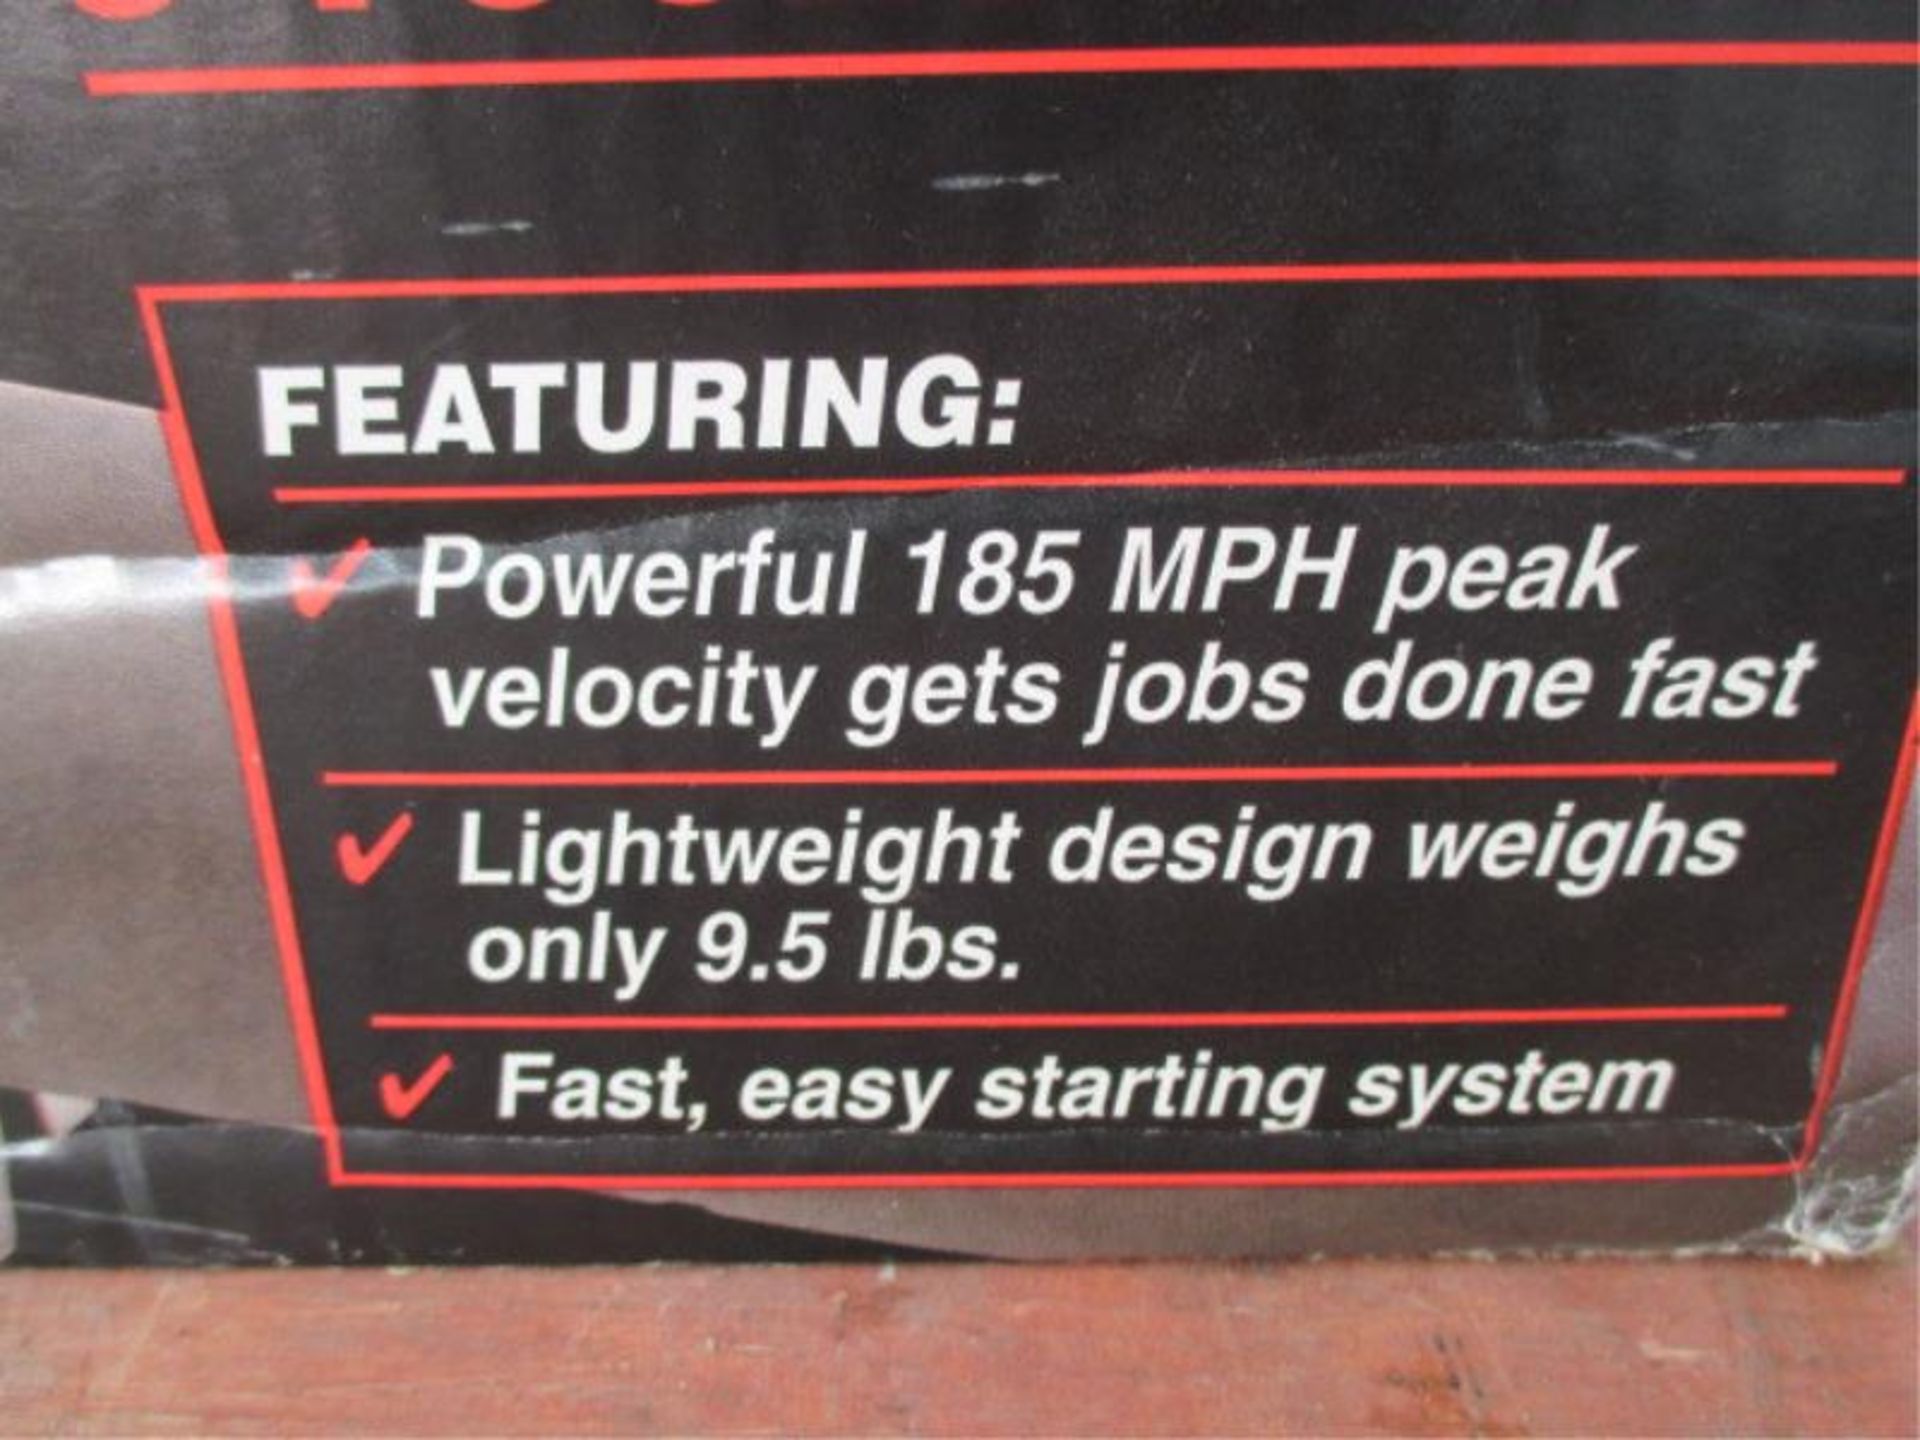 Craftsman Blower / Vac / Mulcher, Gas Operated, 185 MPH Peck Velocity, Model: 7179793, New in Box - Image 3 of 4